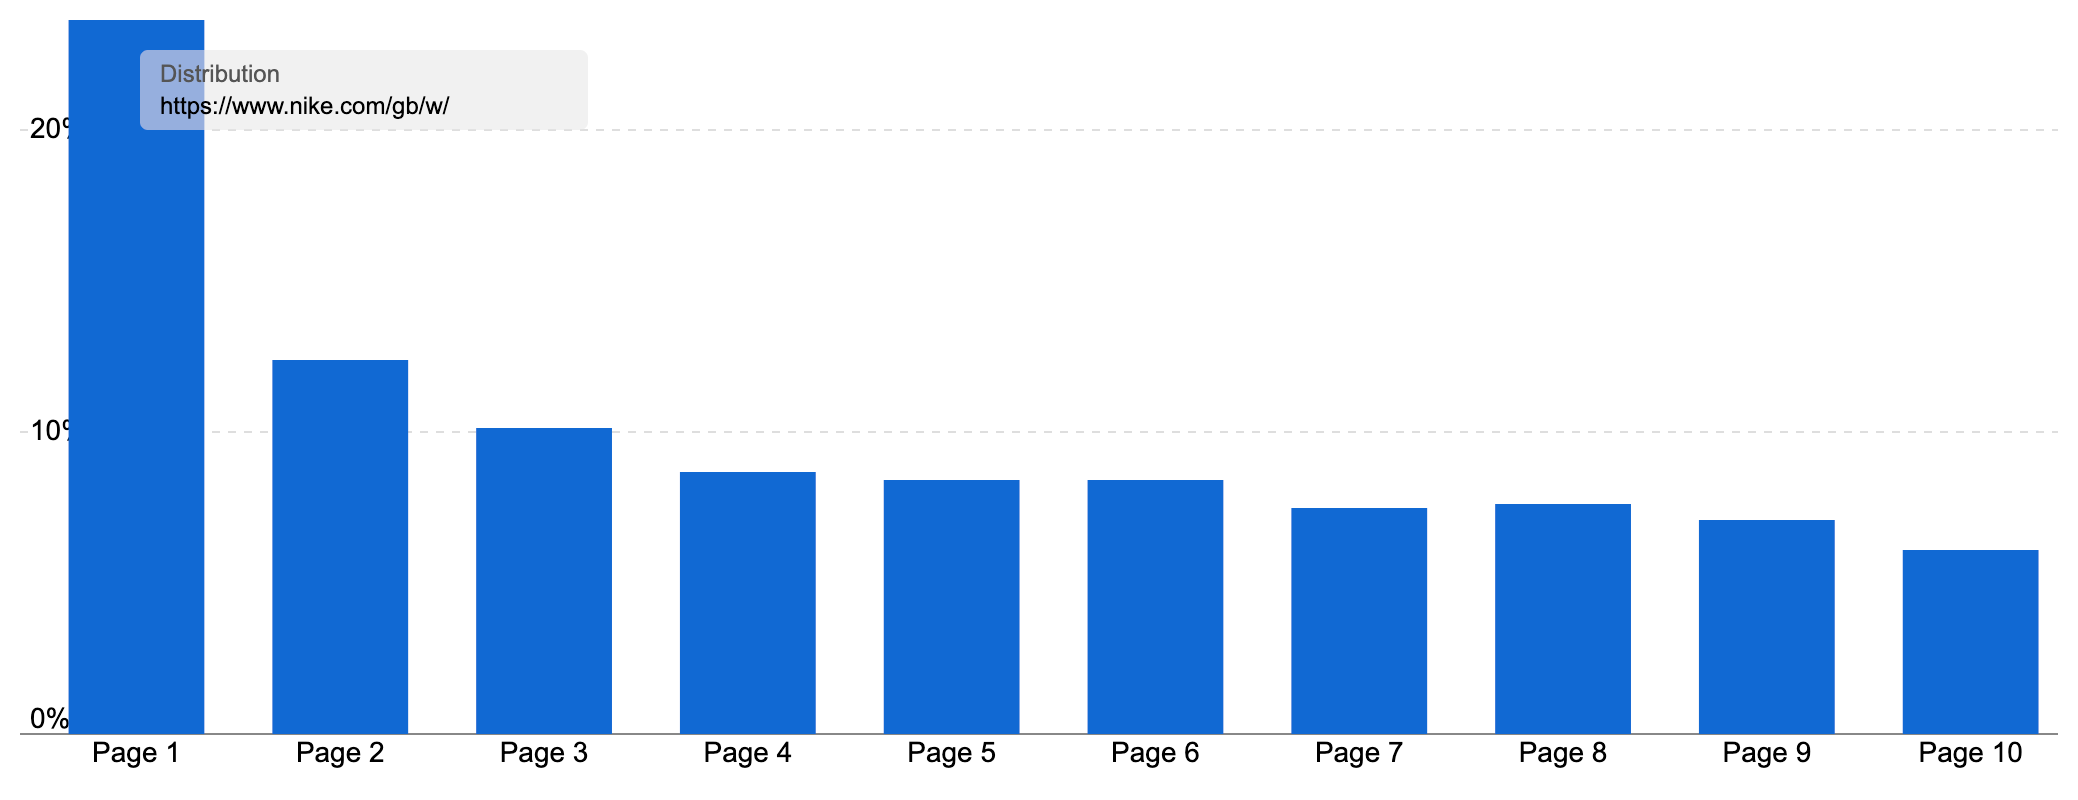 Graph with keyword distribution, most being on page one.